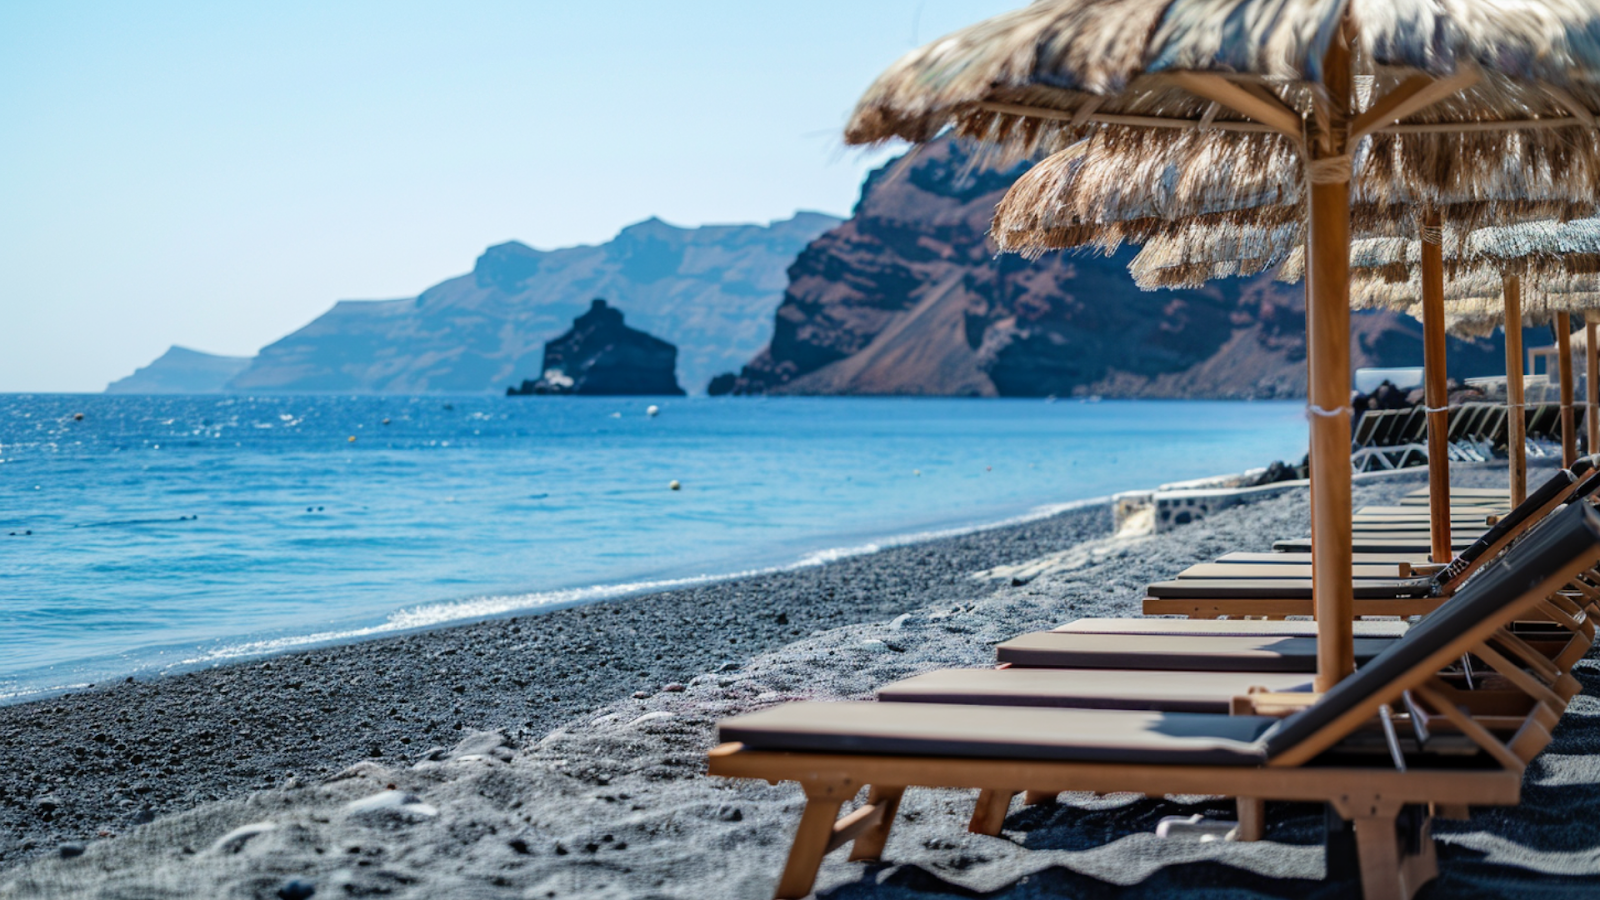 Sun loungers lined up along the beach in Santorini